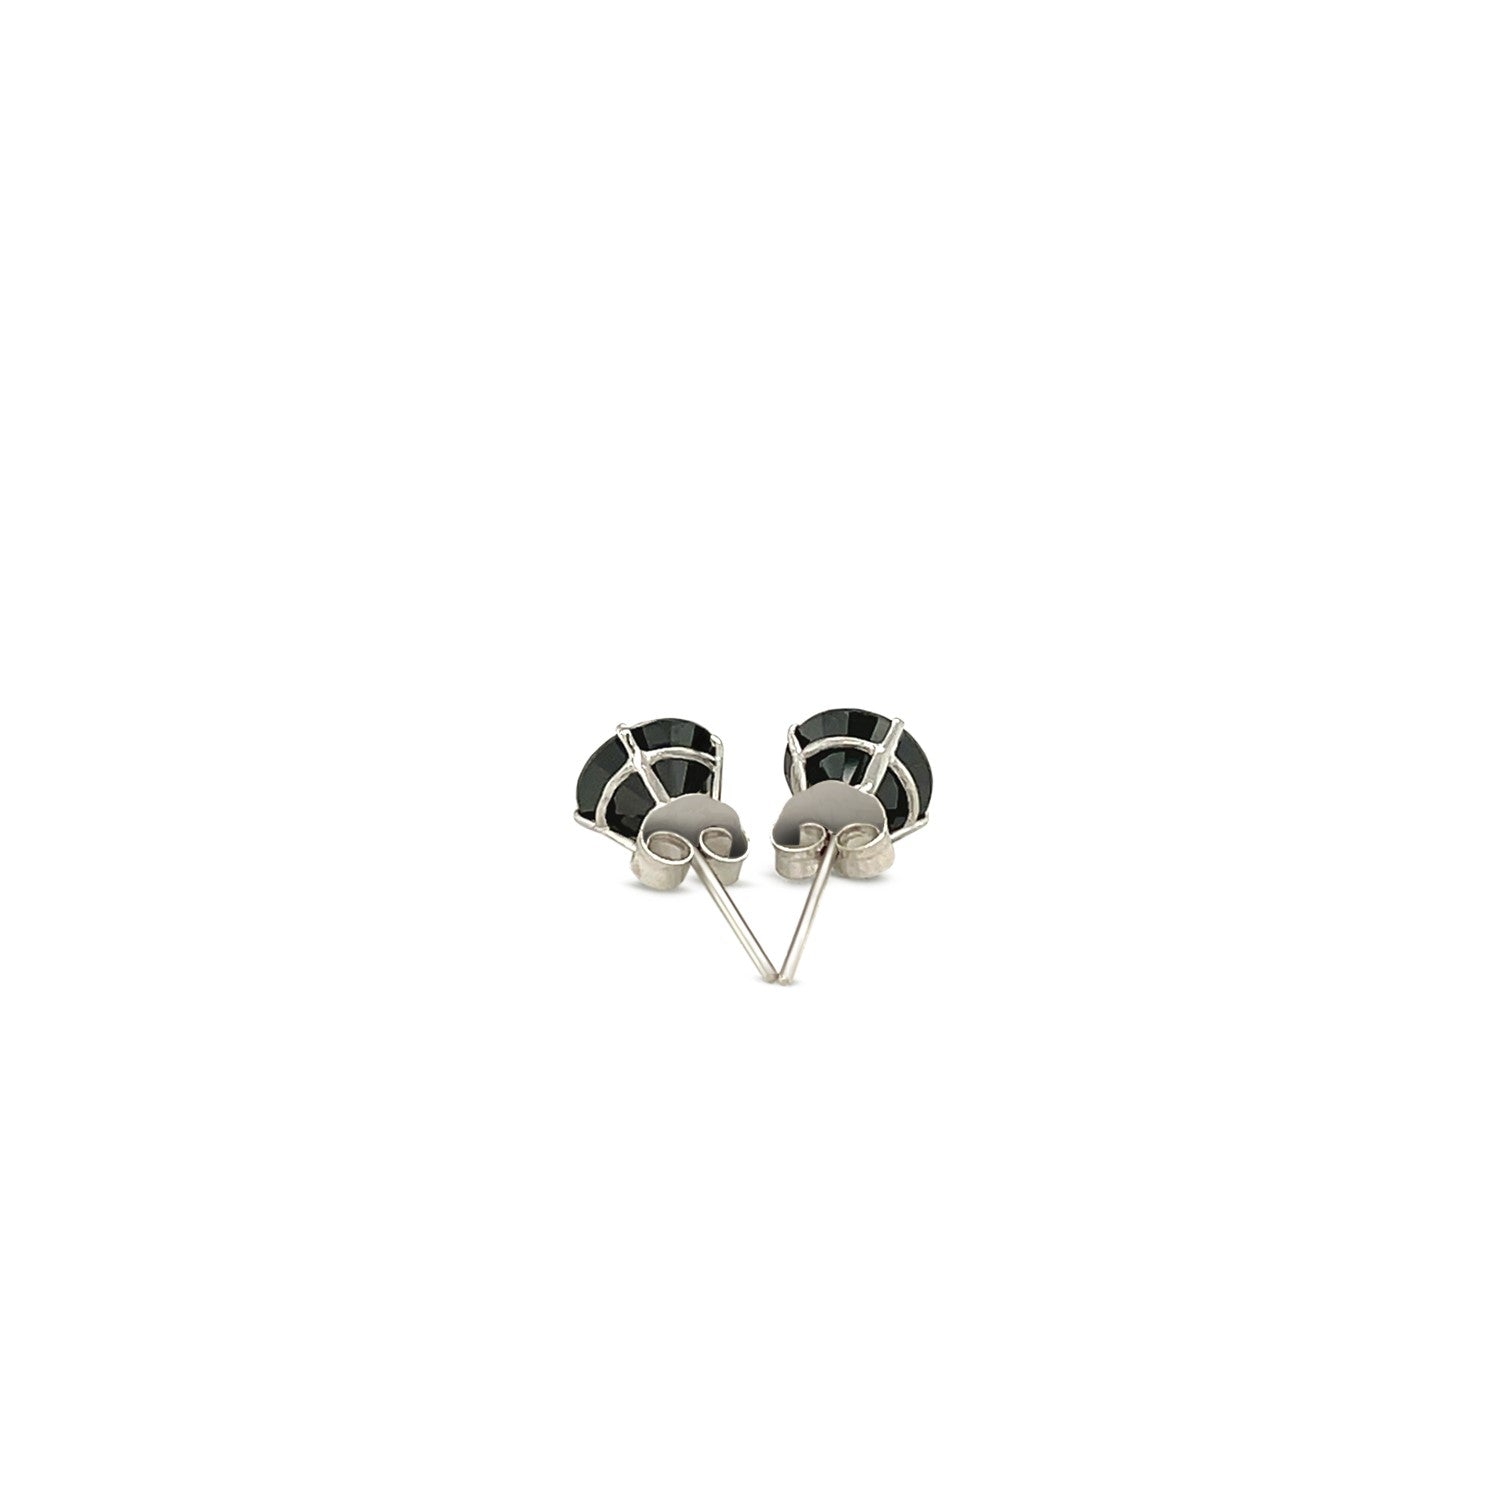 14k White Gold Stud Earrings with Black 6mm Faceted Cubic Zirconia-2